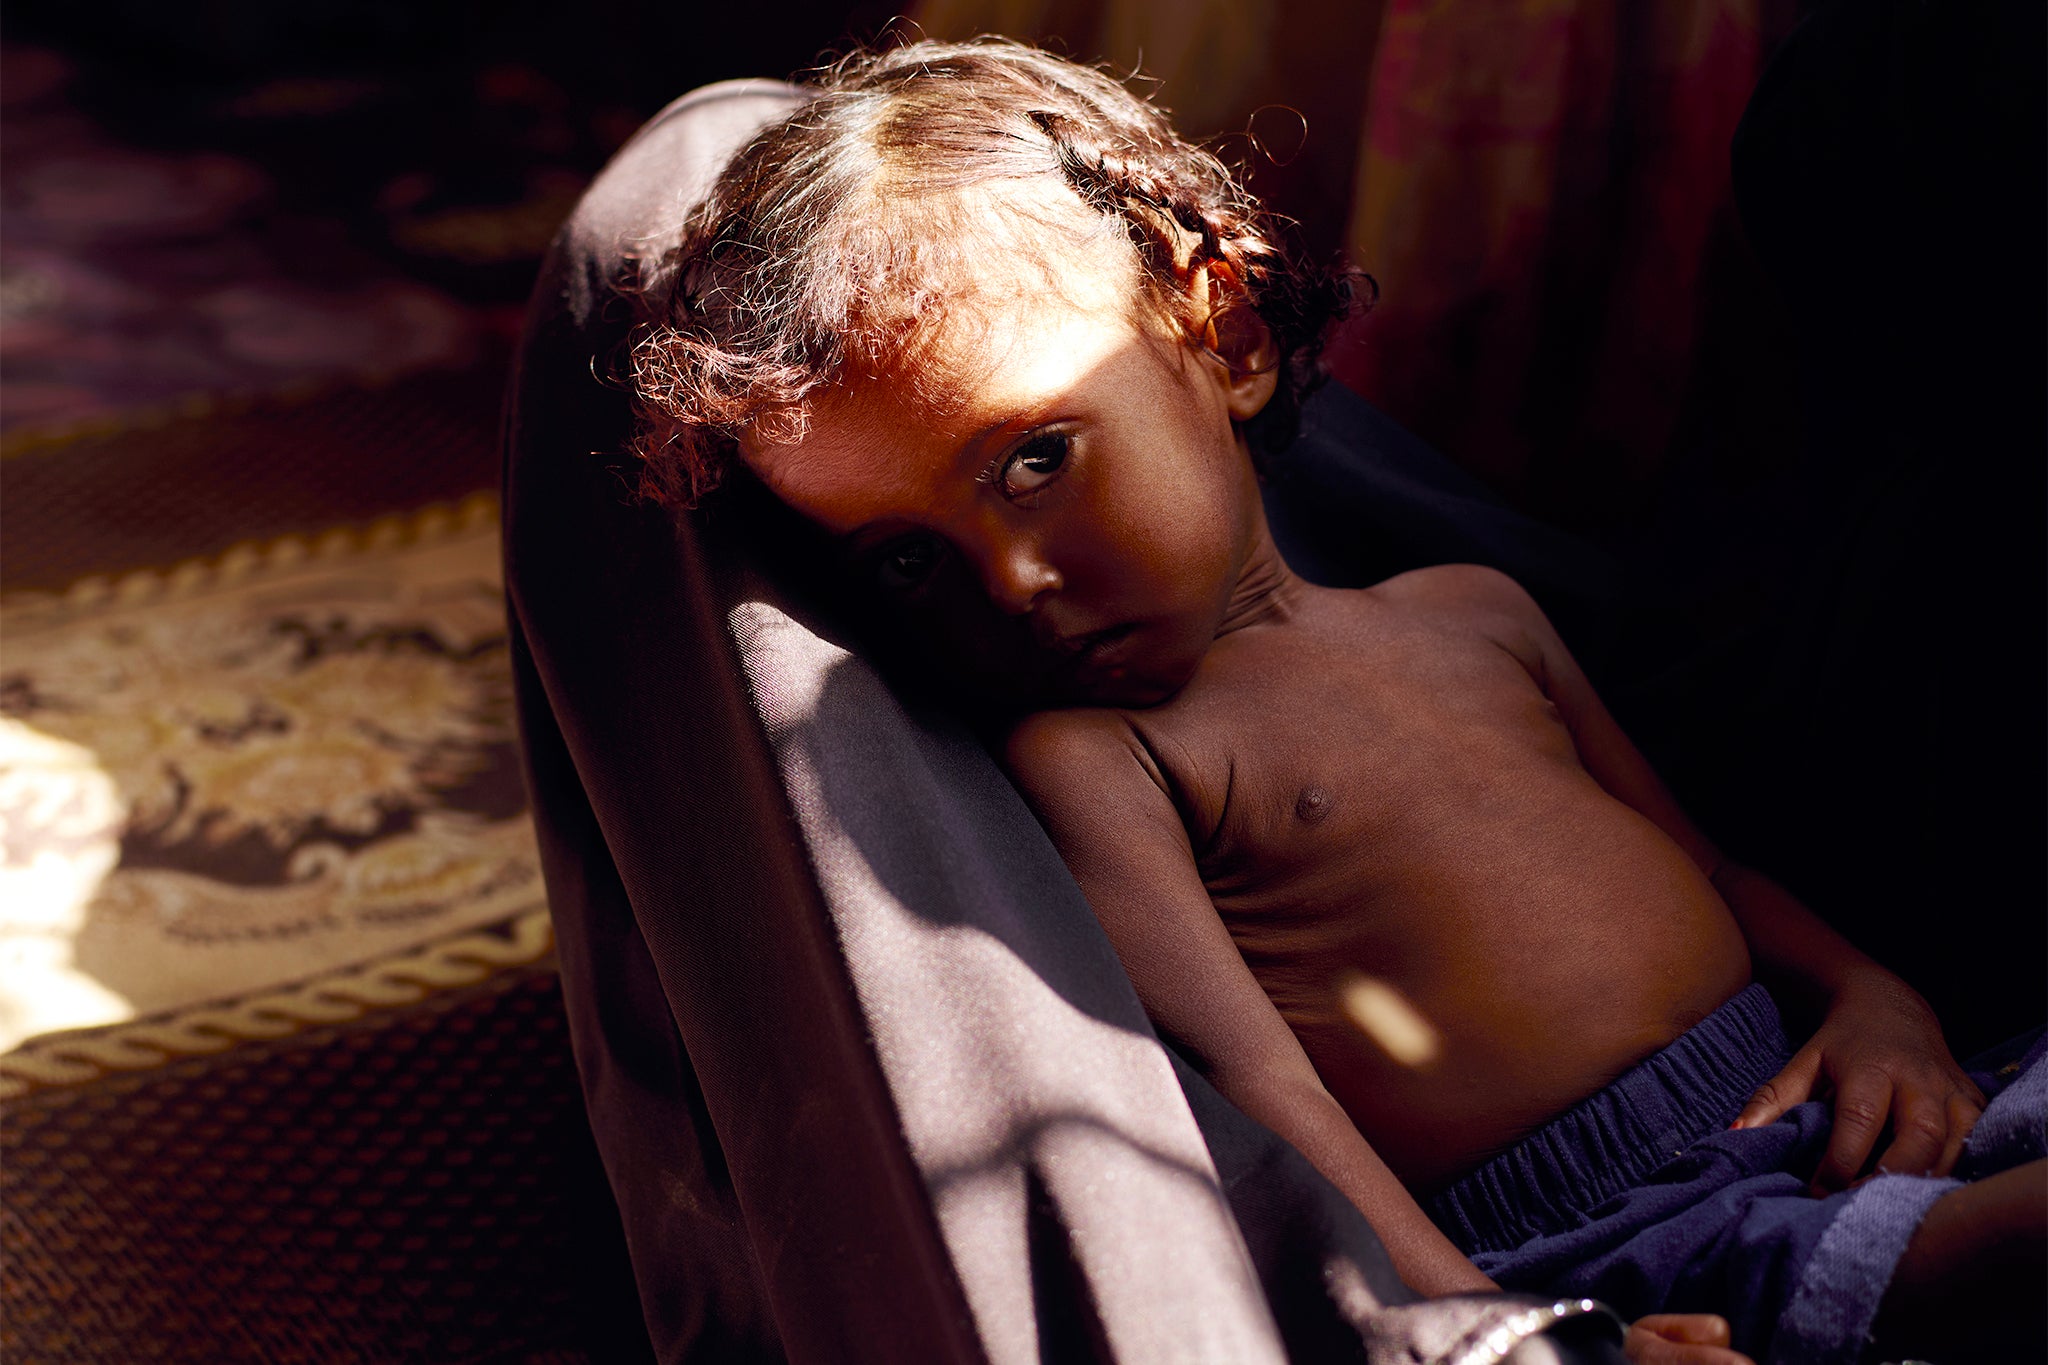 Riam, who was diagnosed with severe malnutrition more than 10 months ago. She is one of the 2.2 million children under five, identified by WFP, as being acutely malnourished in Yemen.